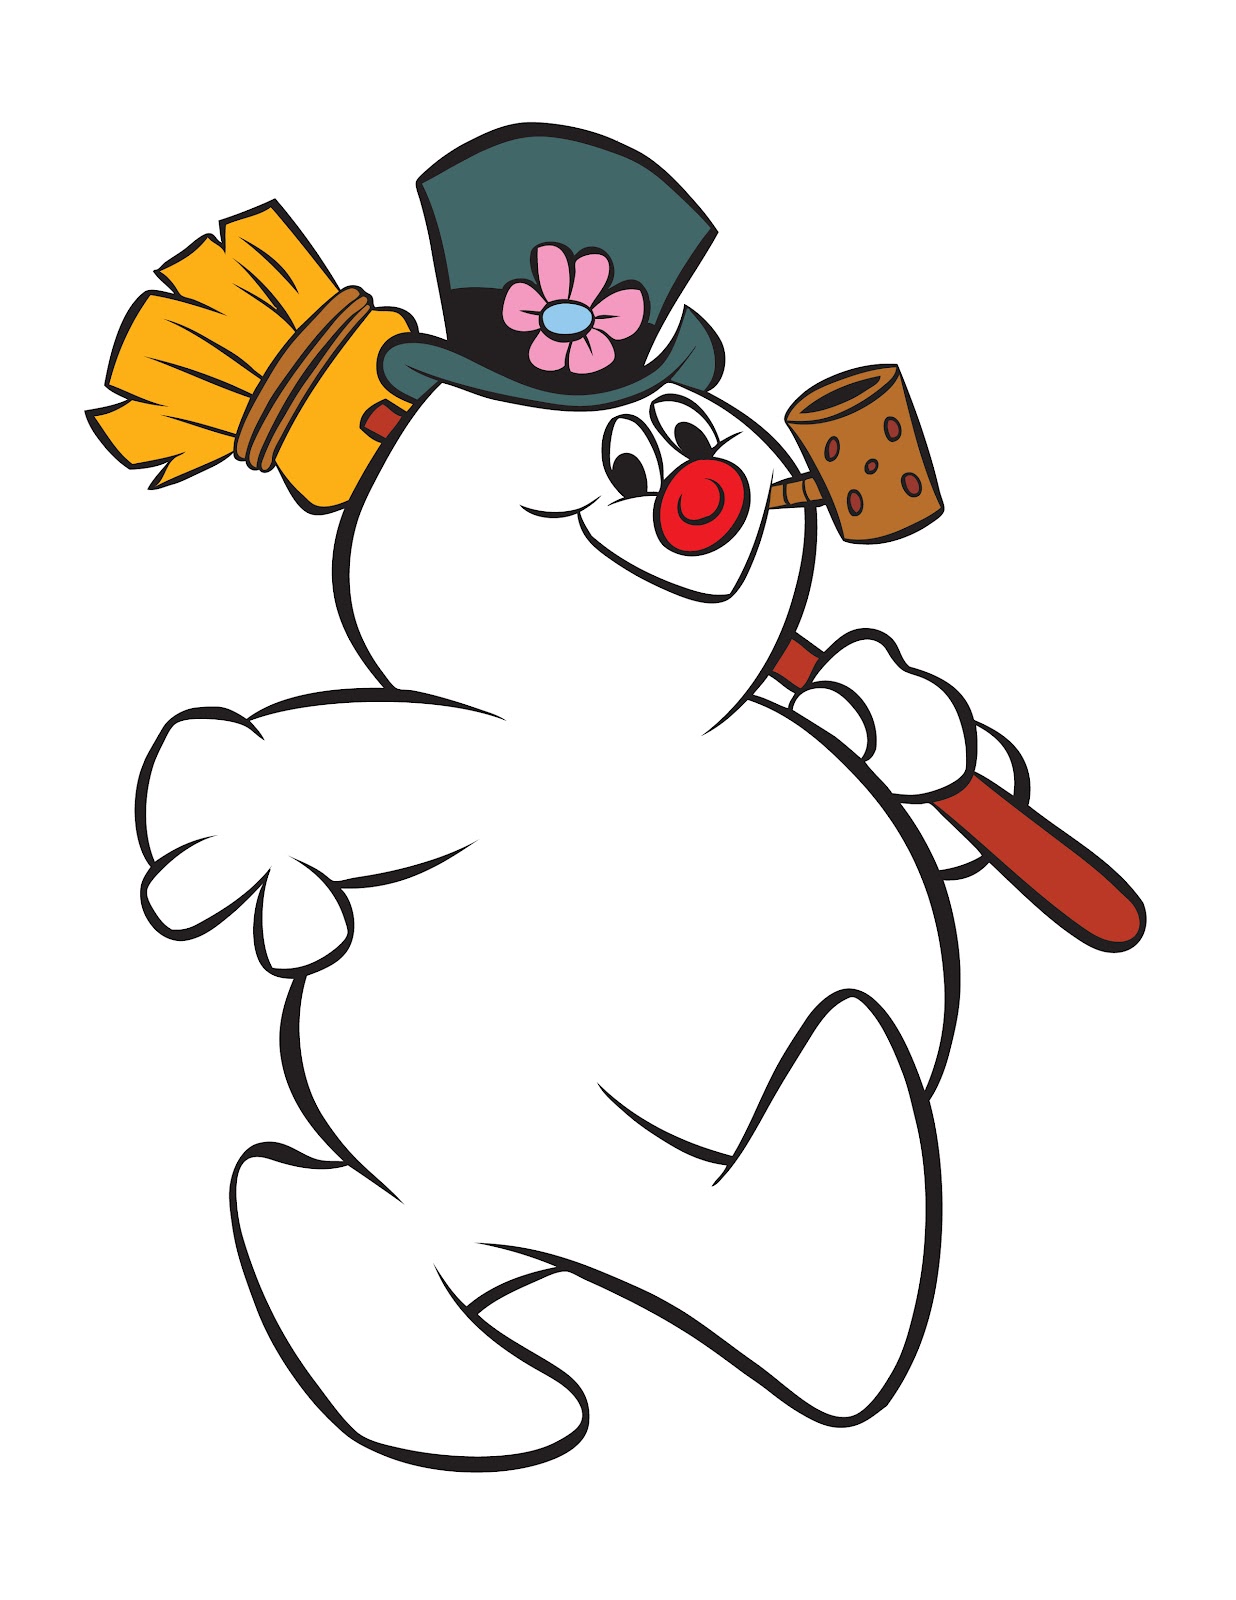 Animated frosty the snowman clipart - ClipartFox